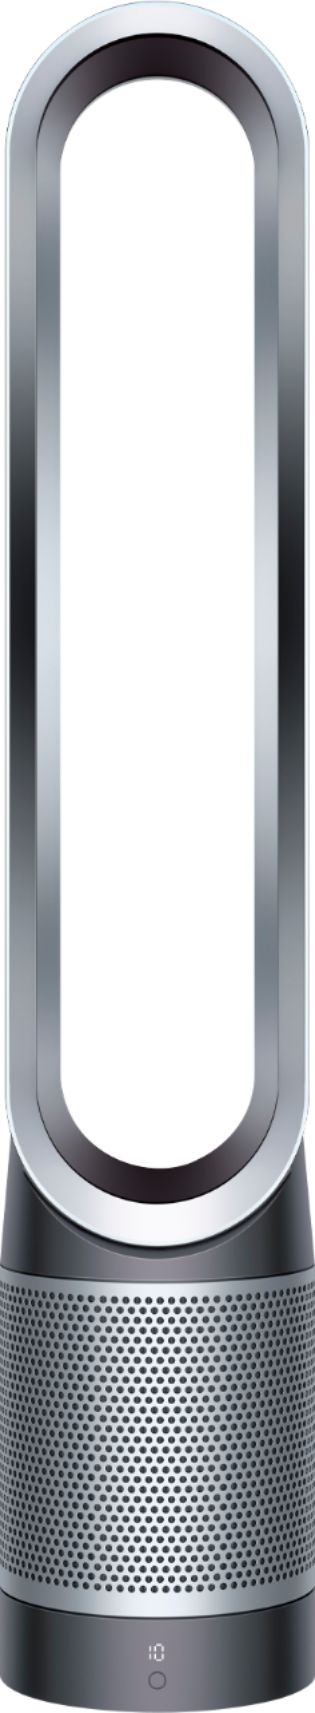 Dyson Pure Cool Purifying Fan TP01, Tower Iron / Silver 286822-01